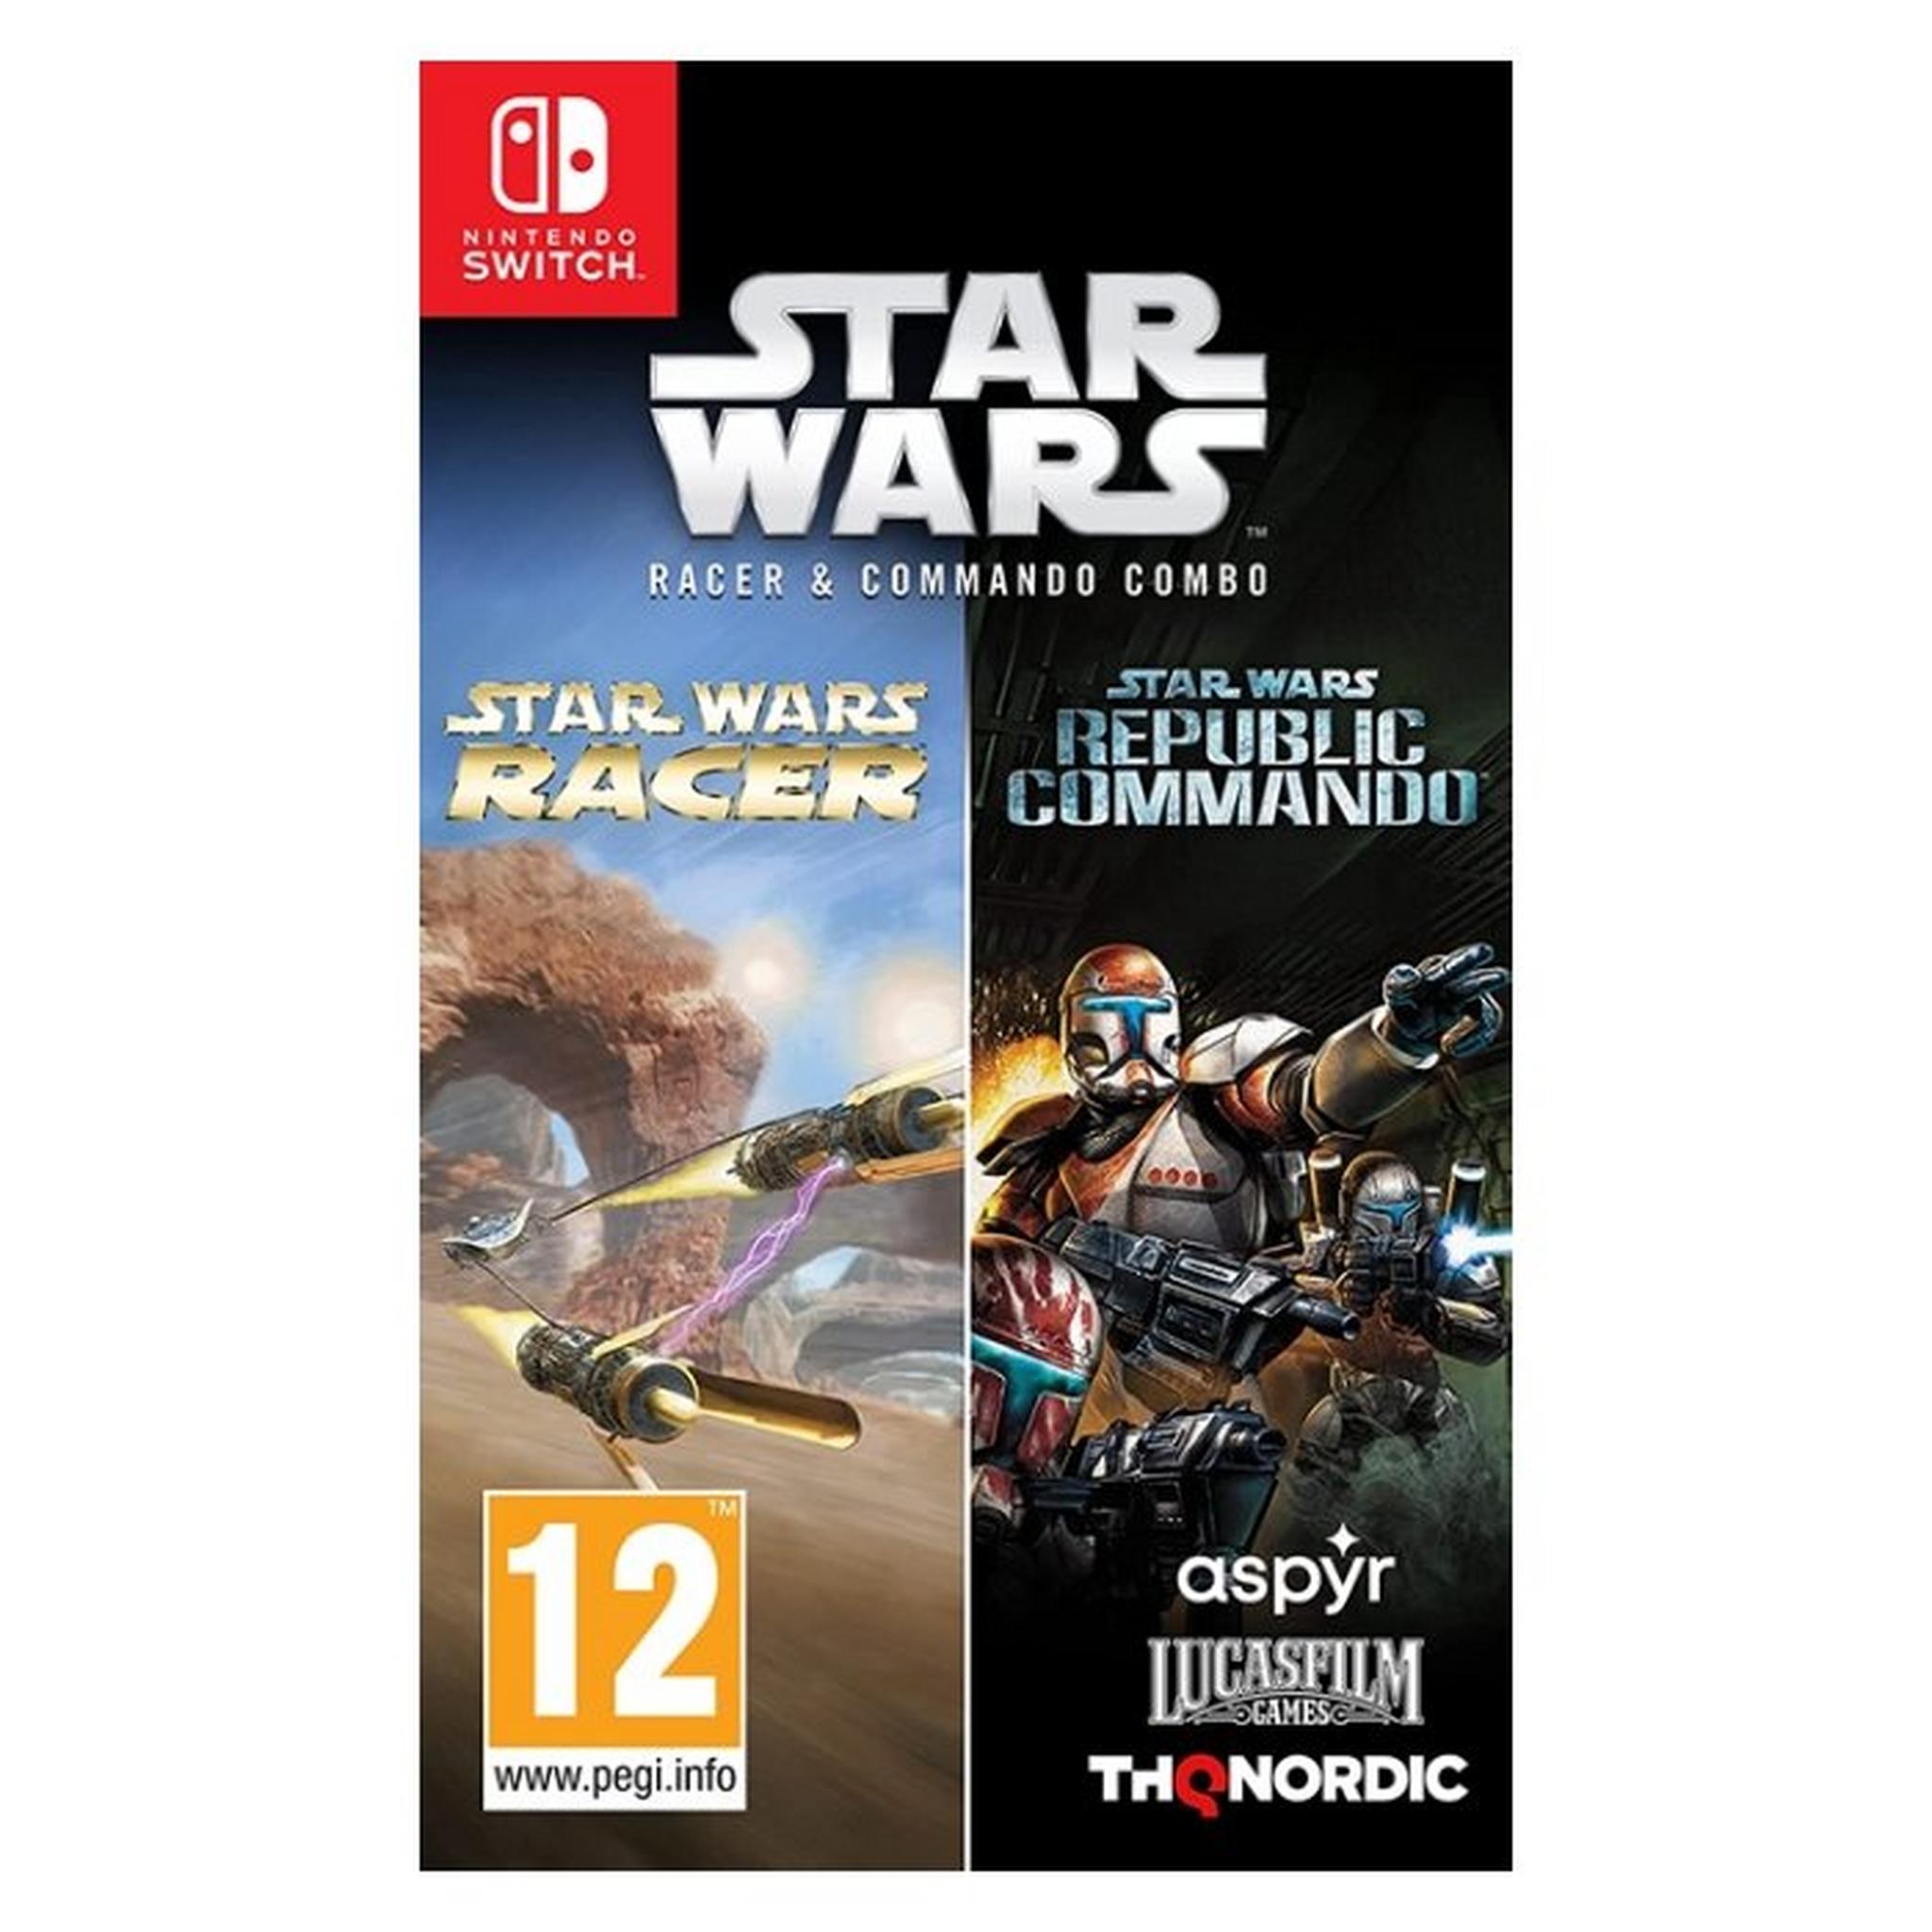 Star Wars Racer and Commando Combo - Nintendo Switch Game